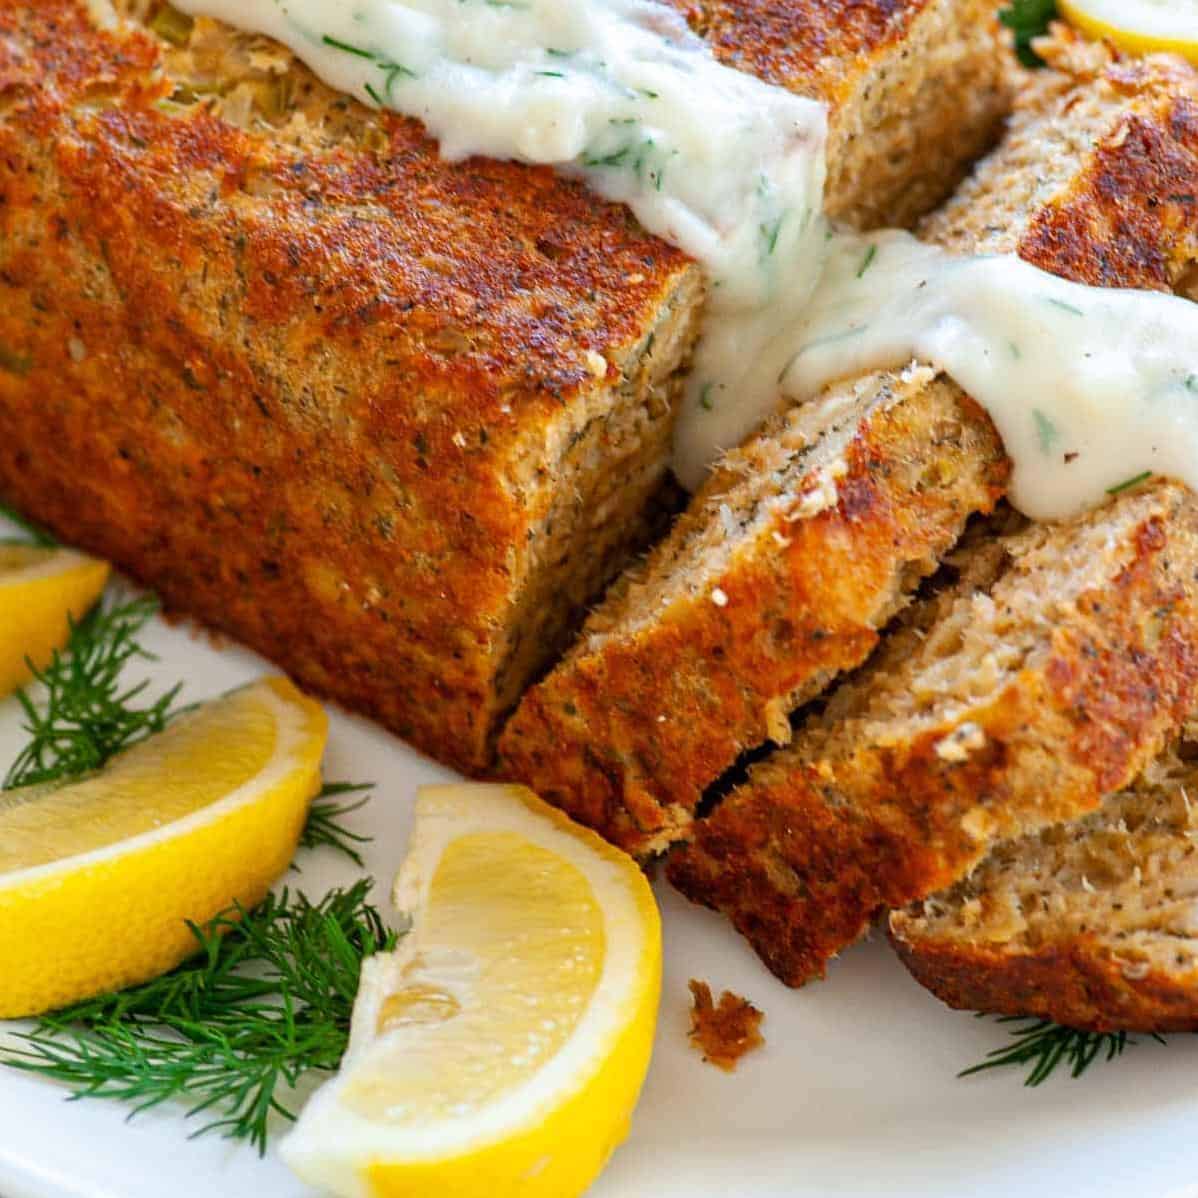  Expertly seasoned salmon loaf packed with bold flavors and rich textures.